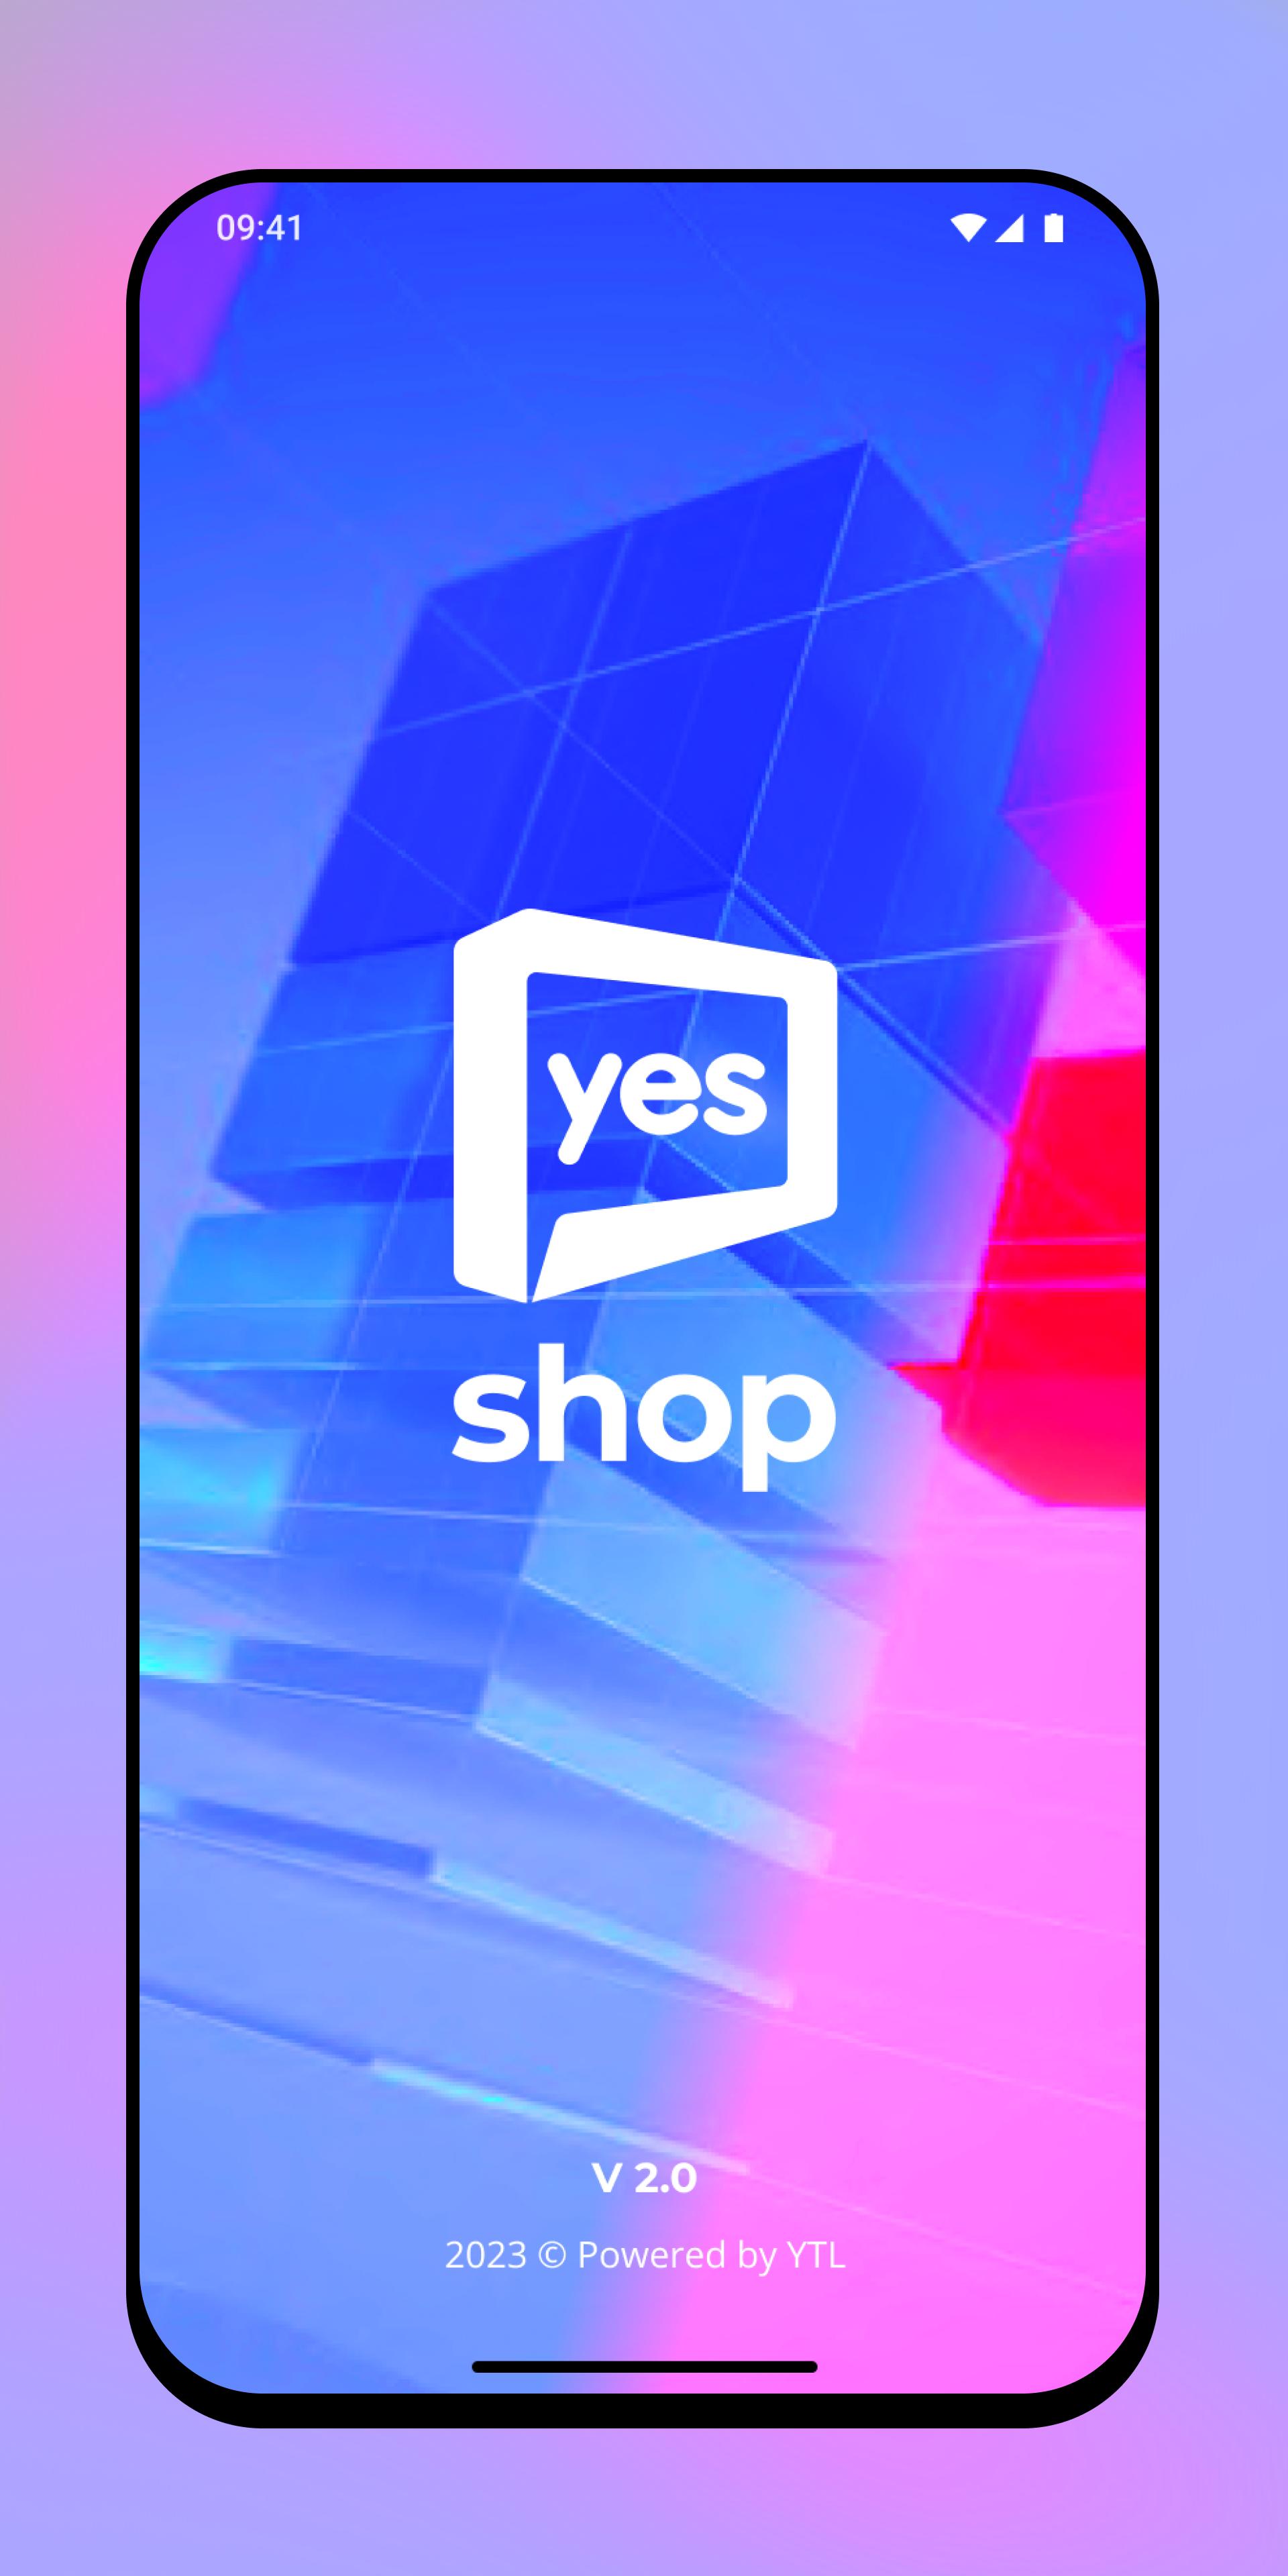 Yes my shop. Yes shop.